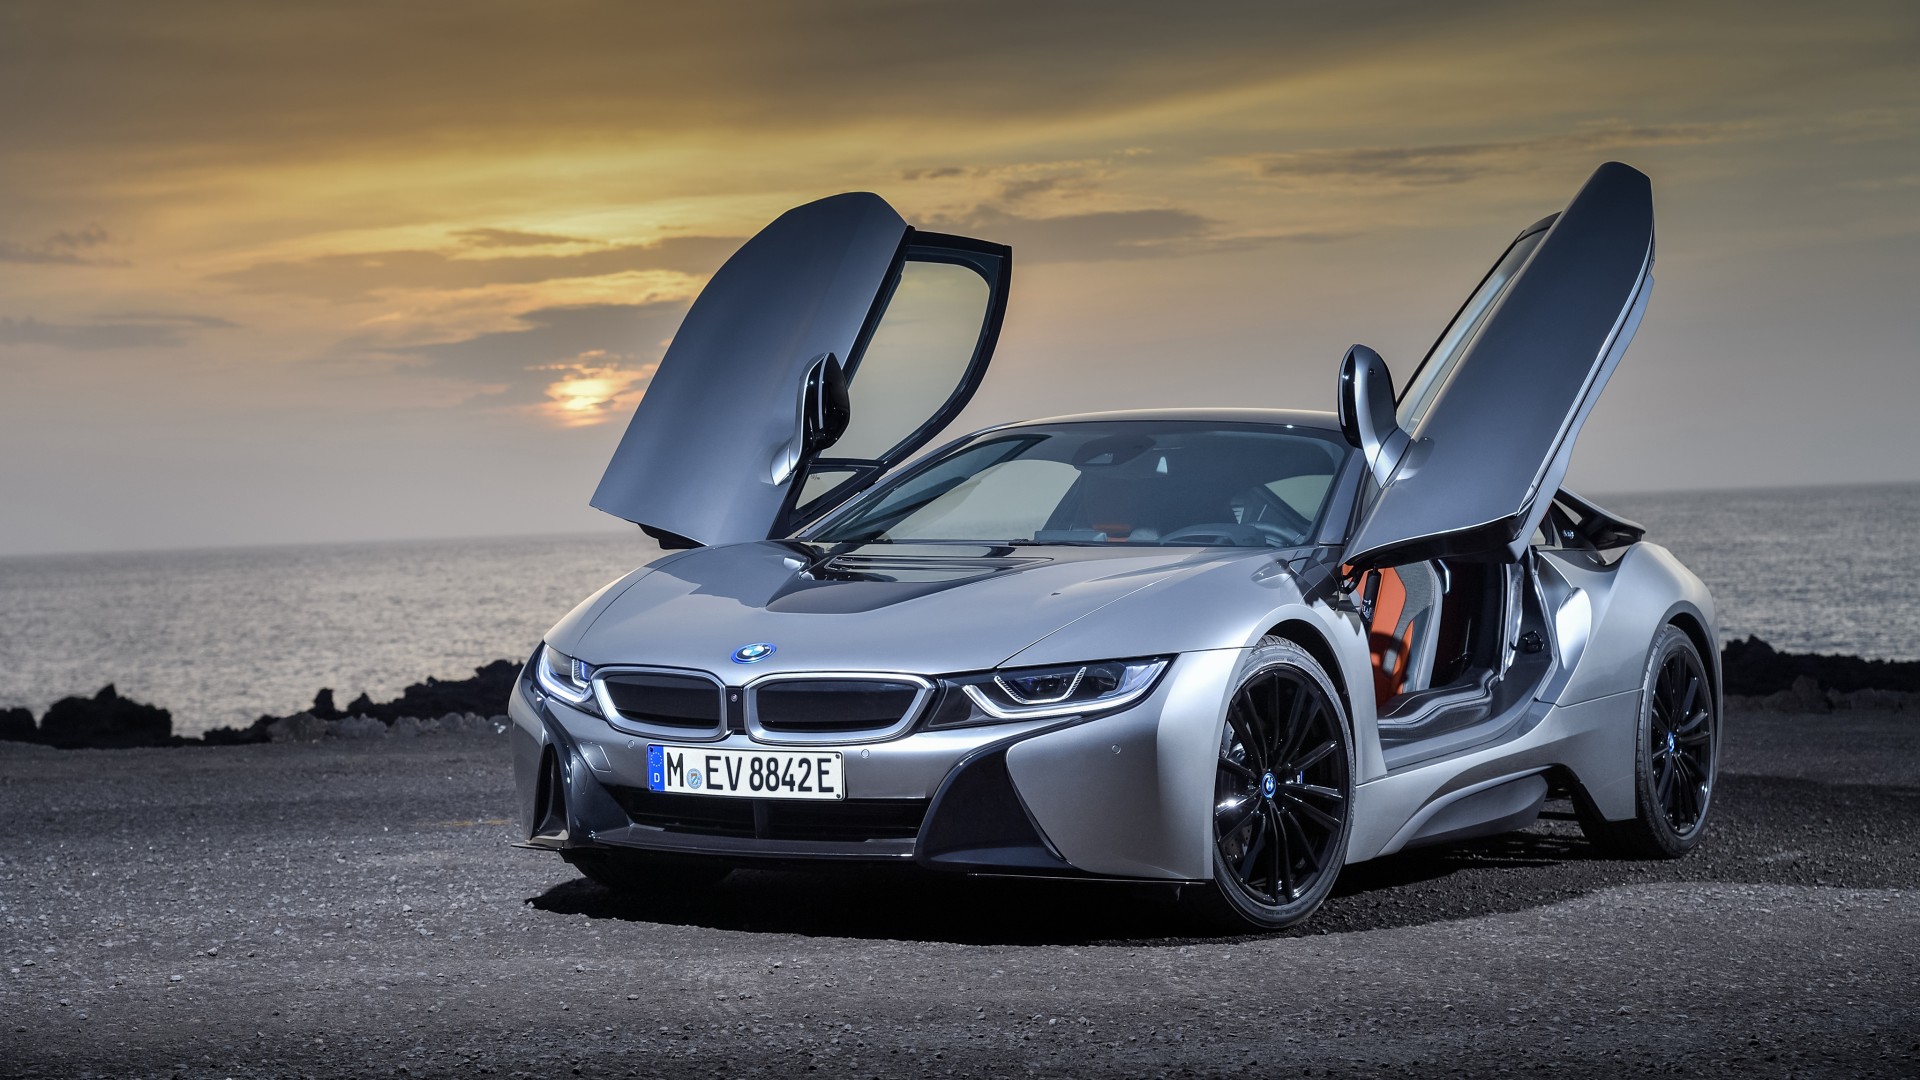 2018 BMW i8 Coupe 4K Wallpaper | HD Car Wallpapers | ID #9191